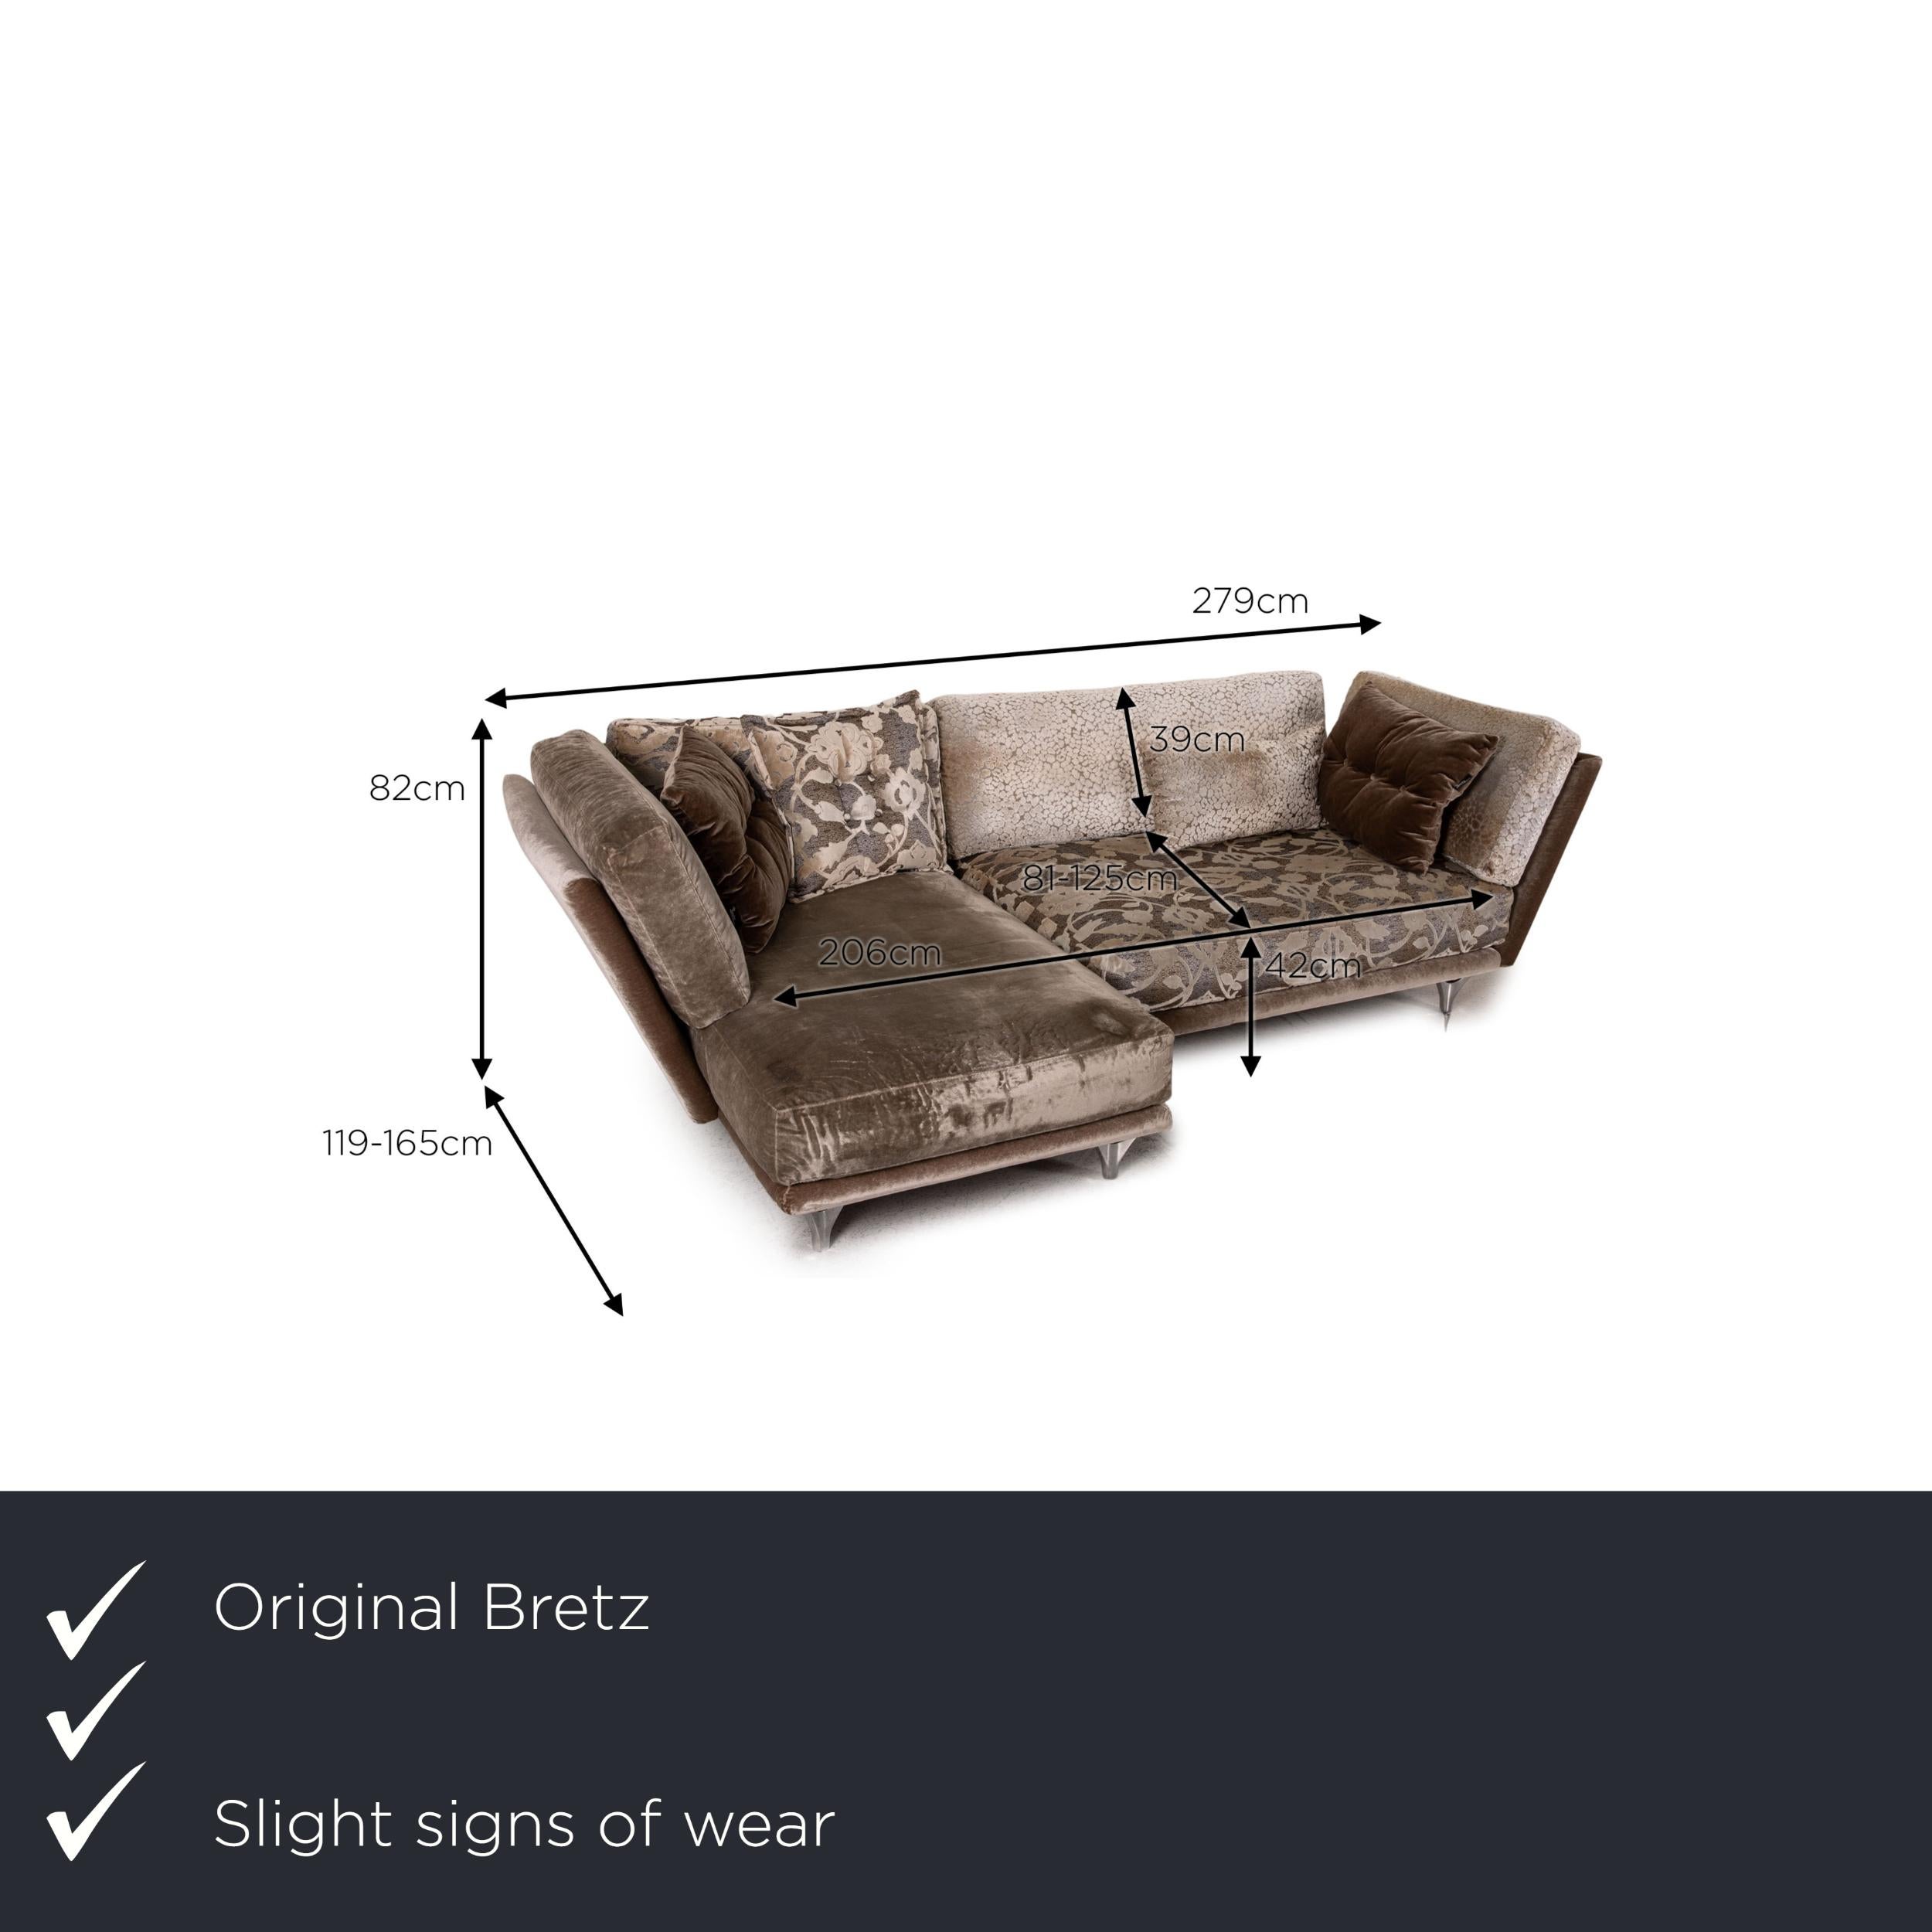 We present to you a Bretz Napali fabric sofa brown corner sofa couch pattern.
  
 

 Product measurements in centimeters:
 

 depth: 119
 width: 279
 height: 82
 seat height: 42
 rest height: 82
 seat depth: 81
 seat width: 206
 back